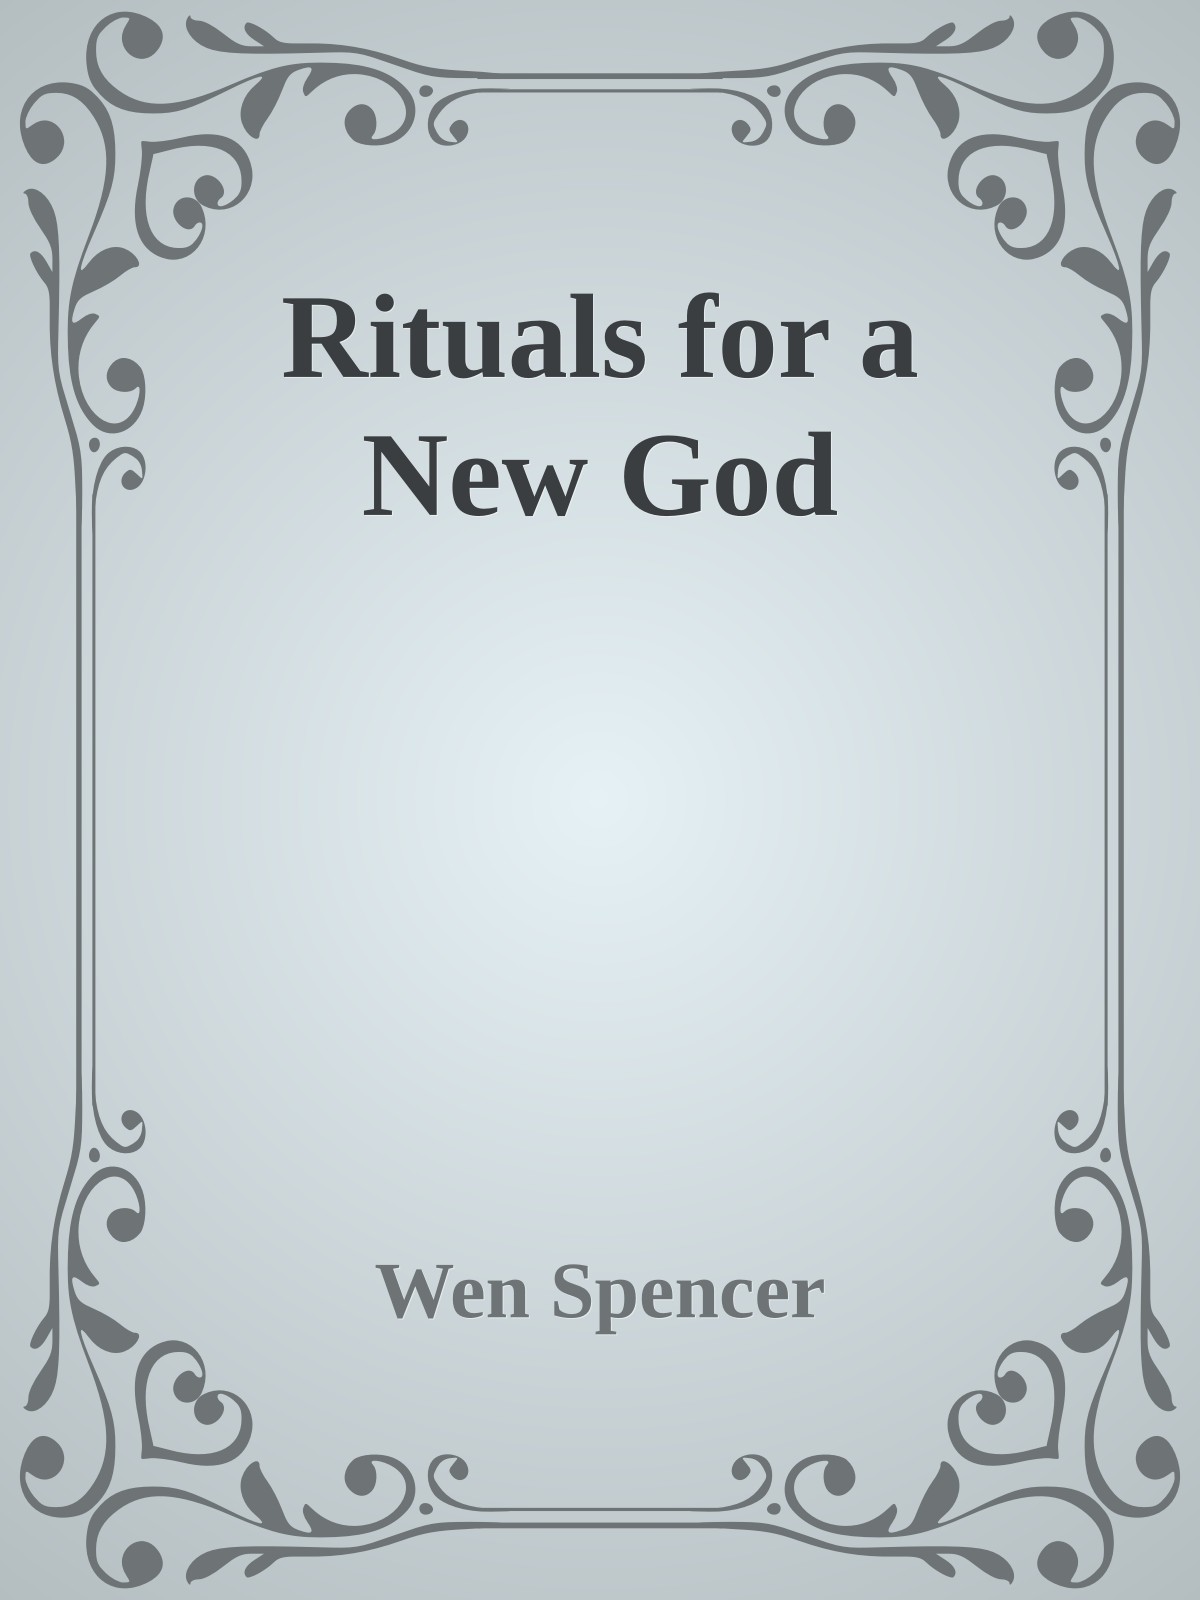 Rituals for a New God